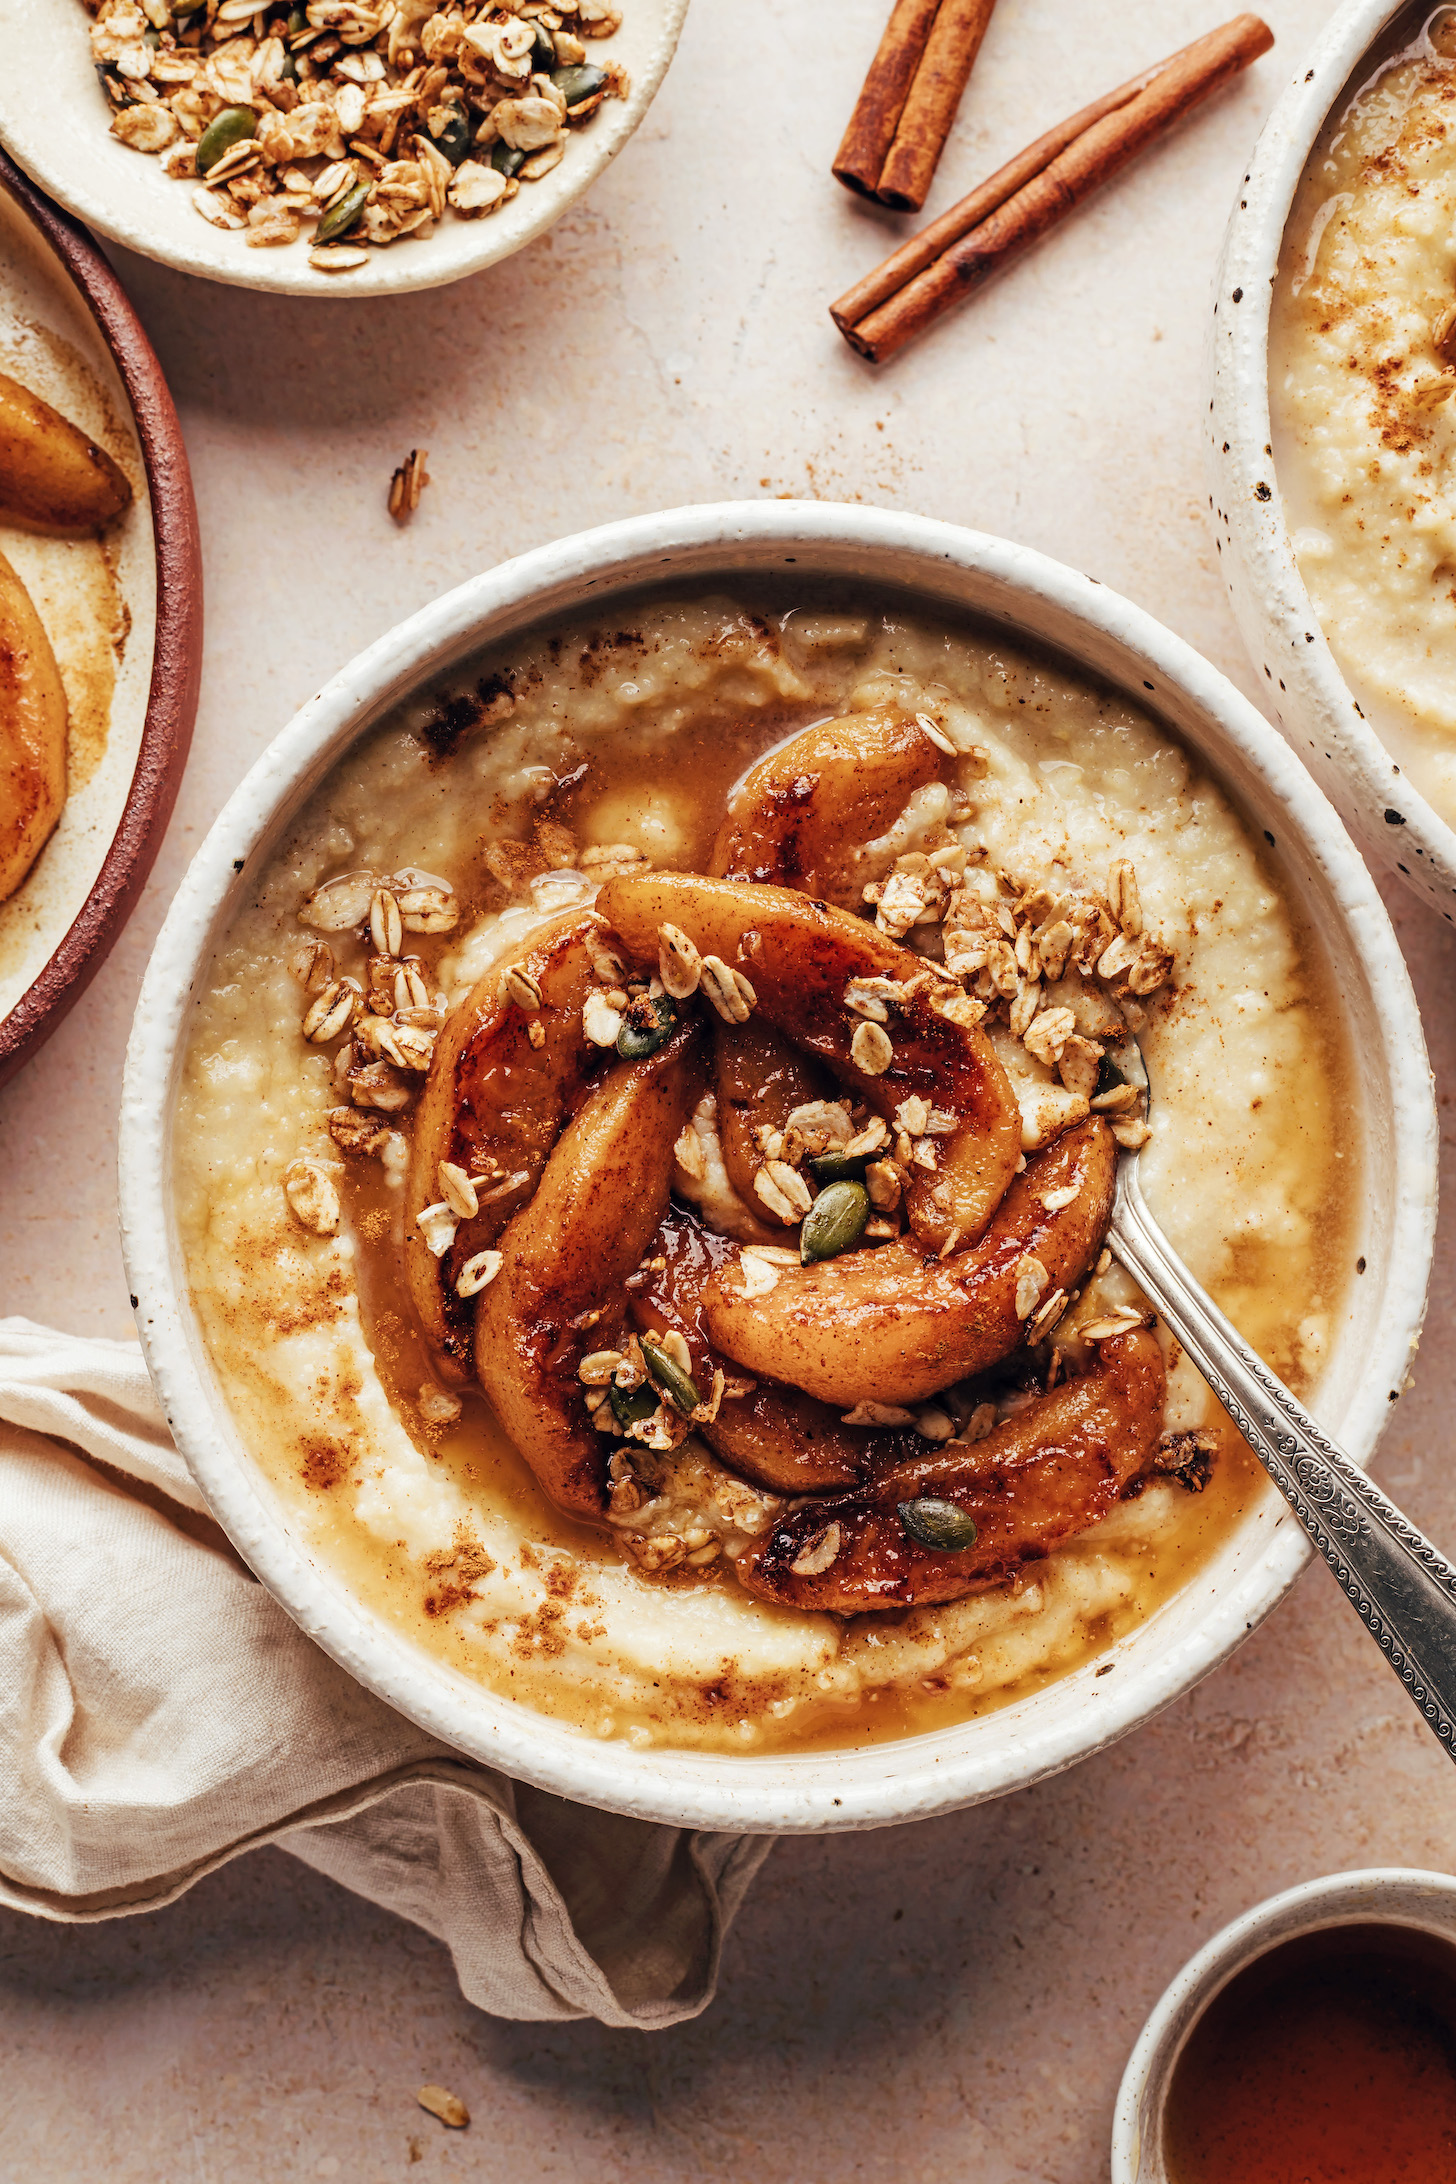 Overhead shot of a bowl of creamy millet porridge with cinnamon-spiced pears and granola